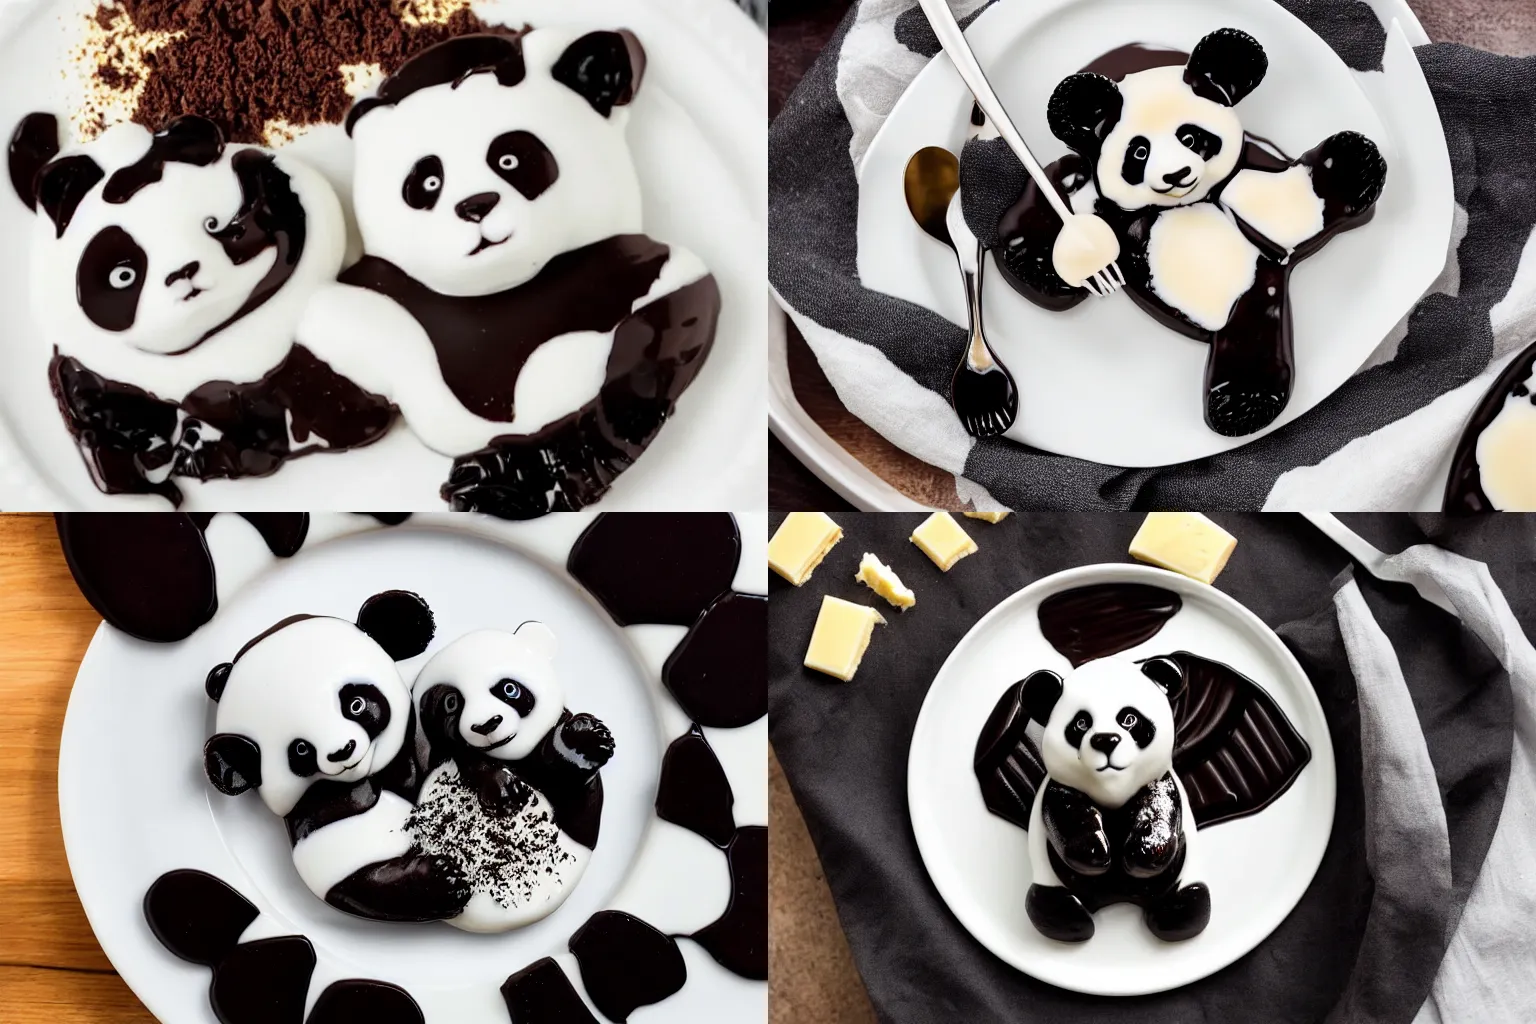 Prompt: panda of black and white melted chocolate on a dessert plate